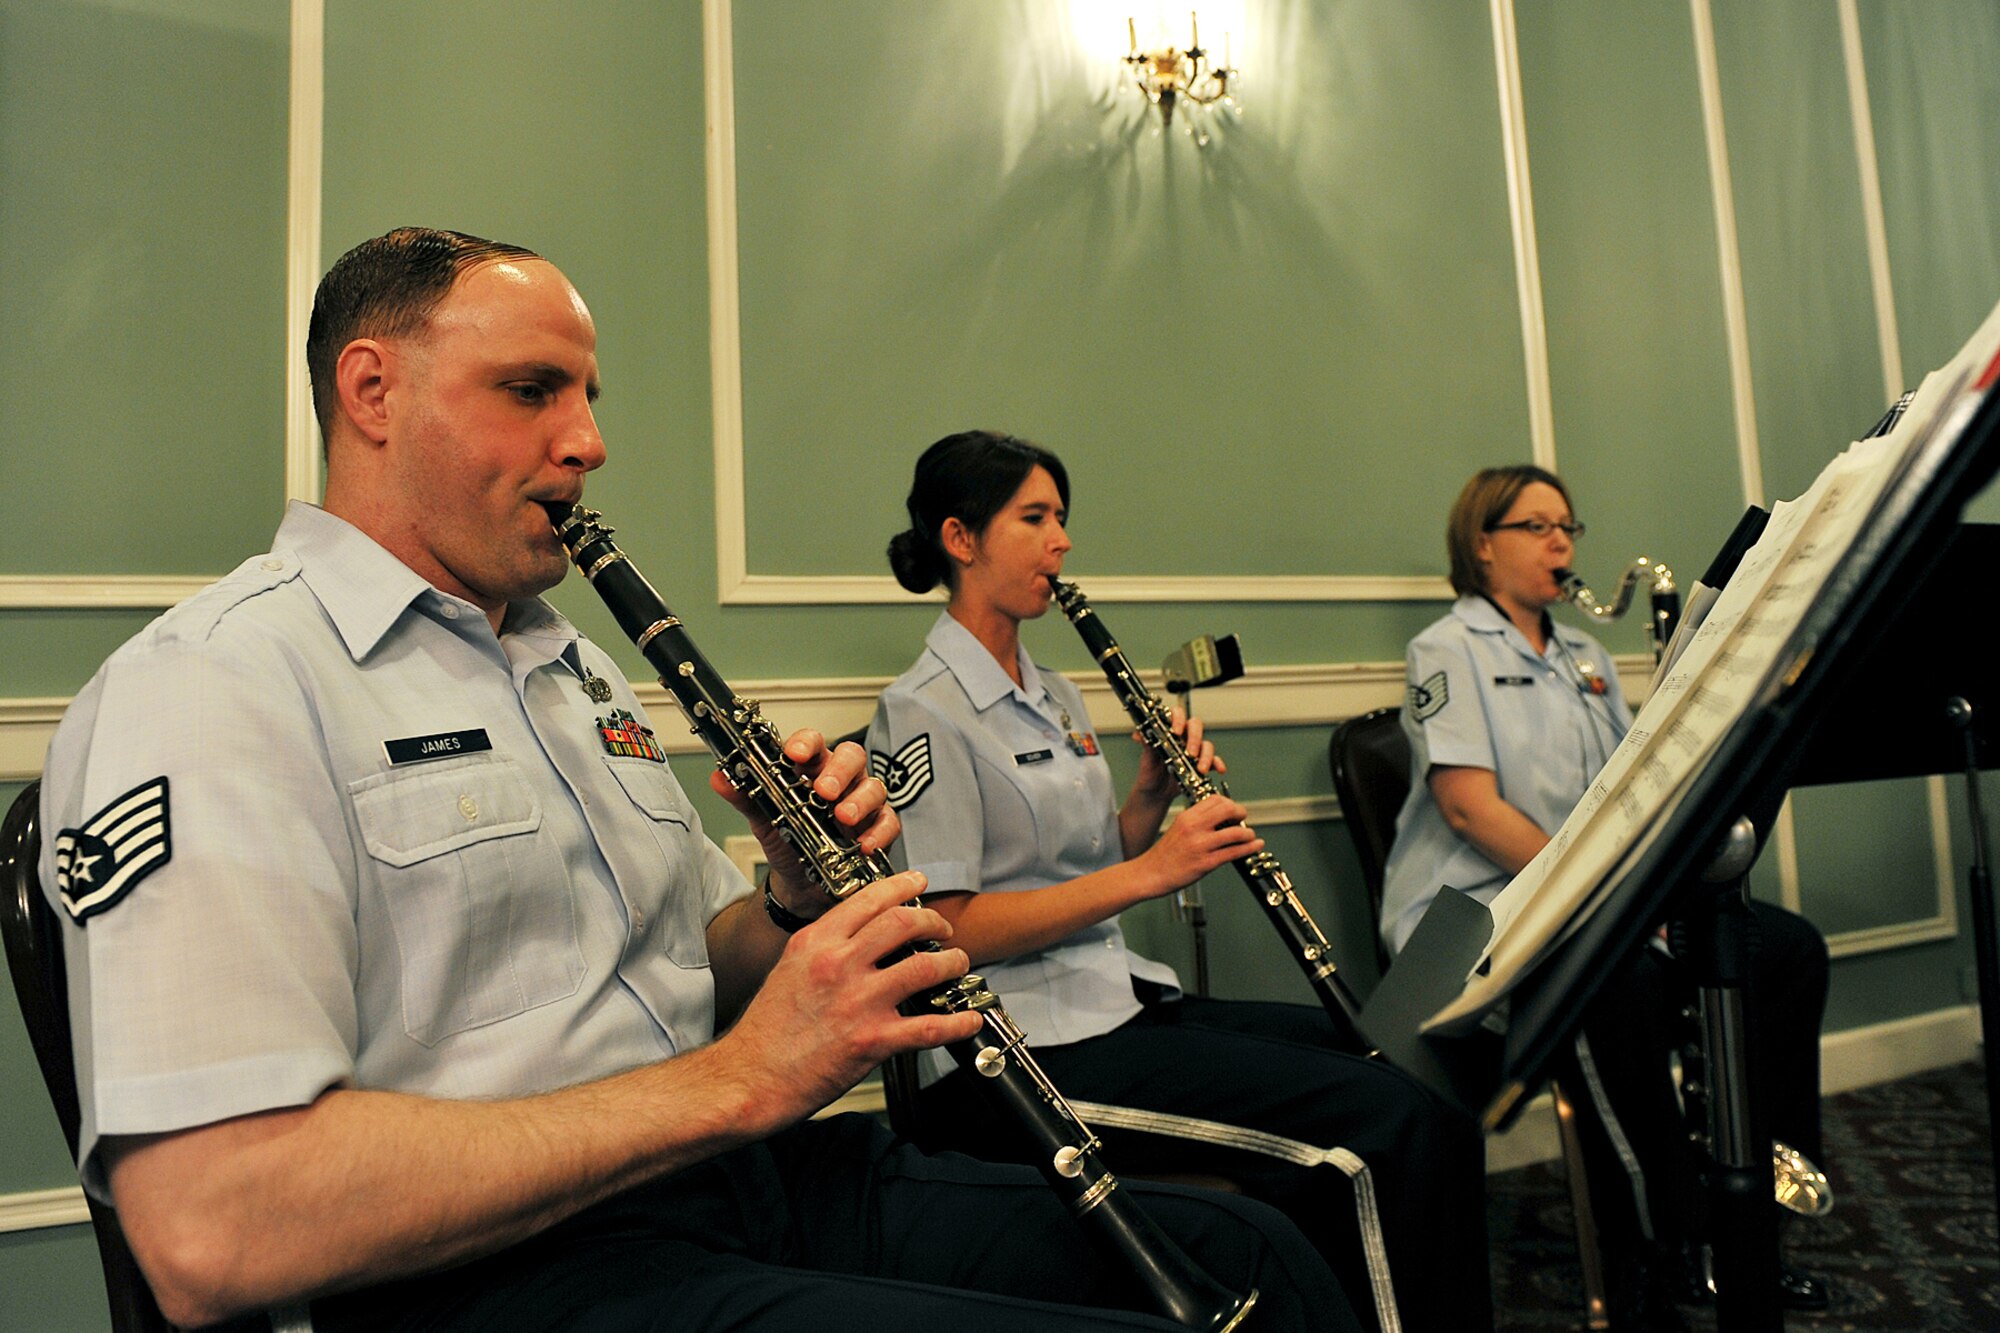 OFFUTT AIR FORCE BASE, Neb. -- Staff Sgt. Clive James, a clarinetist with the  Heartland of America Band's New Horizons Clarinet Ensemble, performs at the Patriot Club here April 28 before the Volunteer Appreciation Reception. More than 80 people from various organizations on and off-base attended the event to honor the contributions of Offutt's many volunteers. U.S. Air Force photo by Charles Haymond